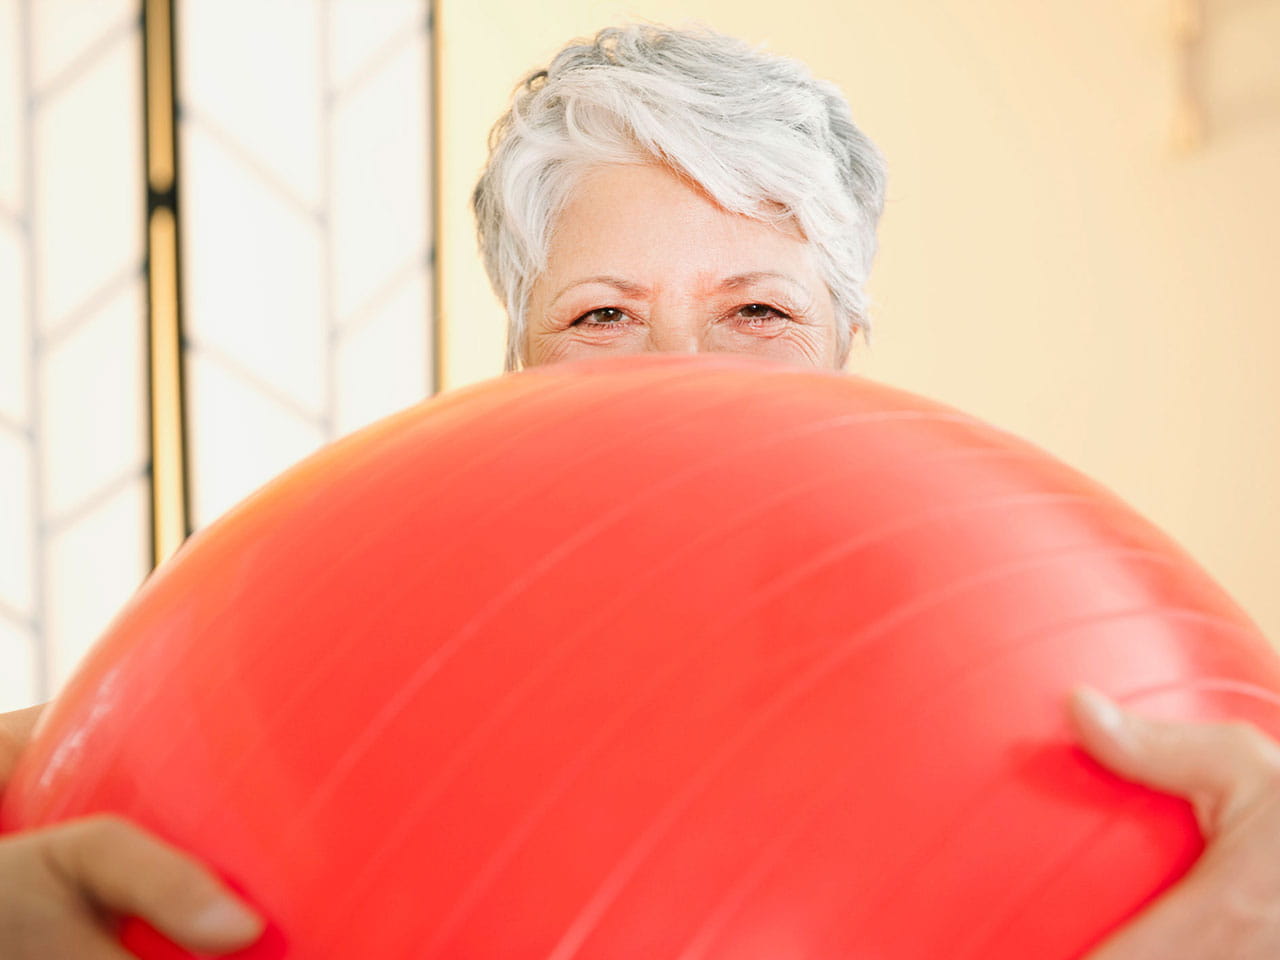 Grey haired lady holding gym ball with smiley eyes